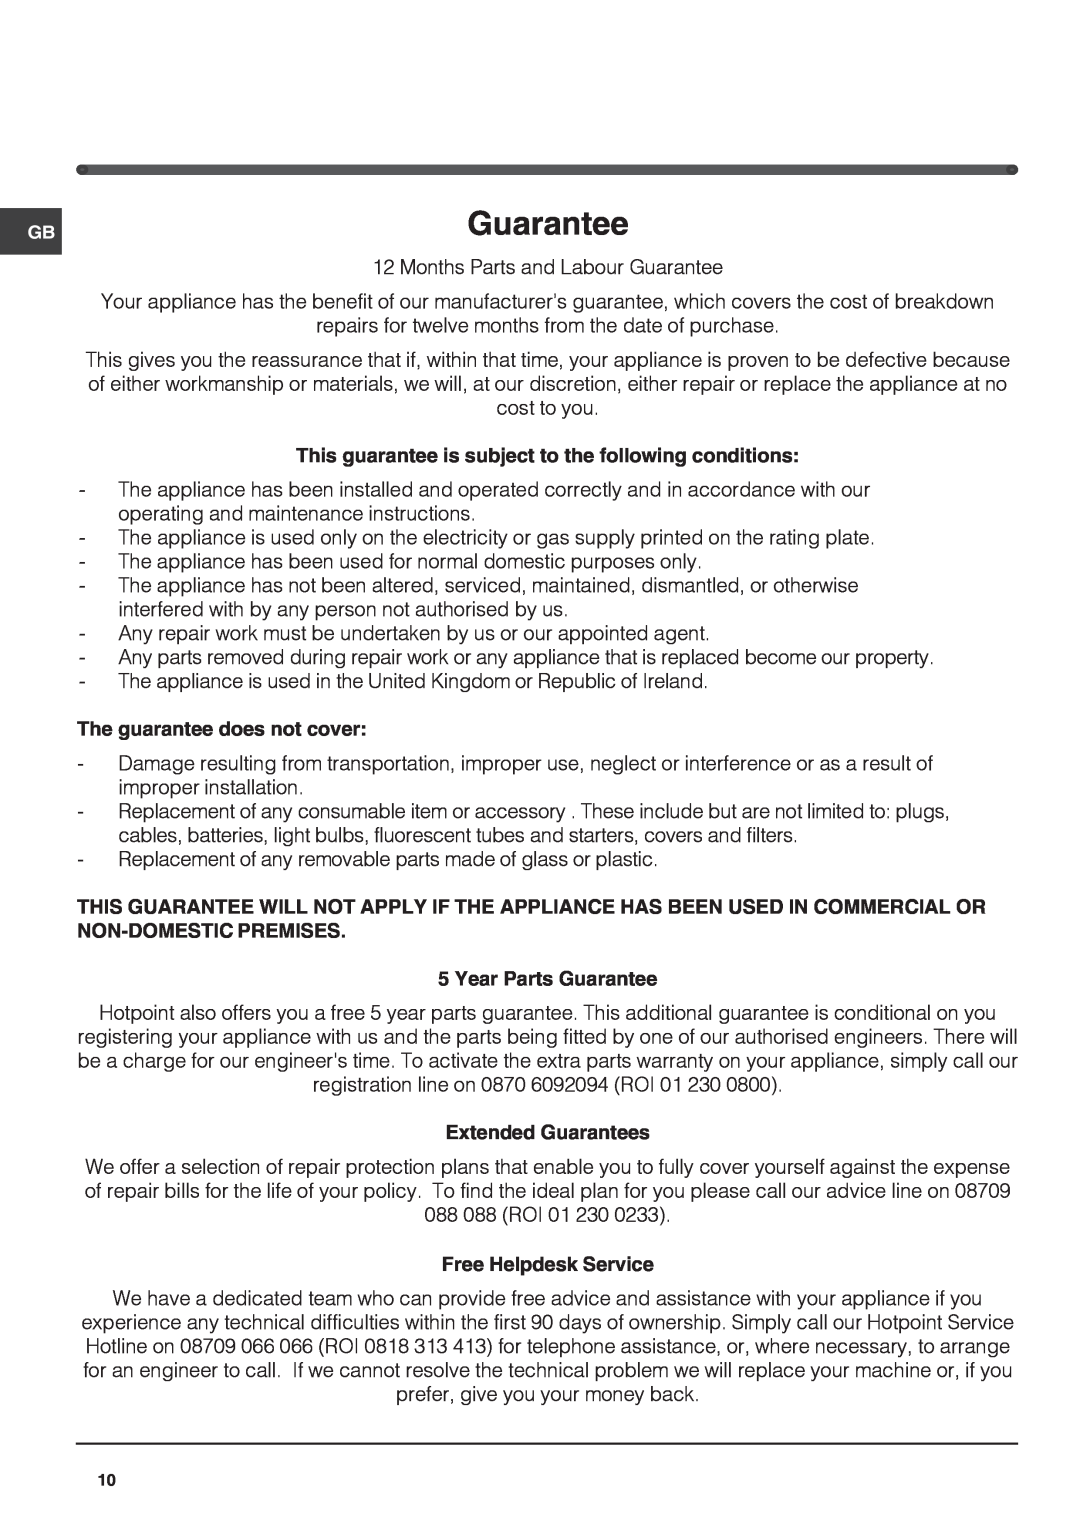 Hotpoint RLS150G manual Guarantee, This guarantee is subject to the following conditions, The guarantee does not cover 